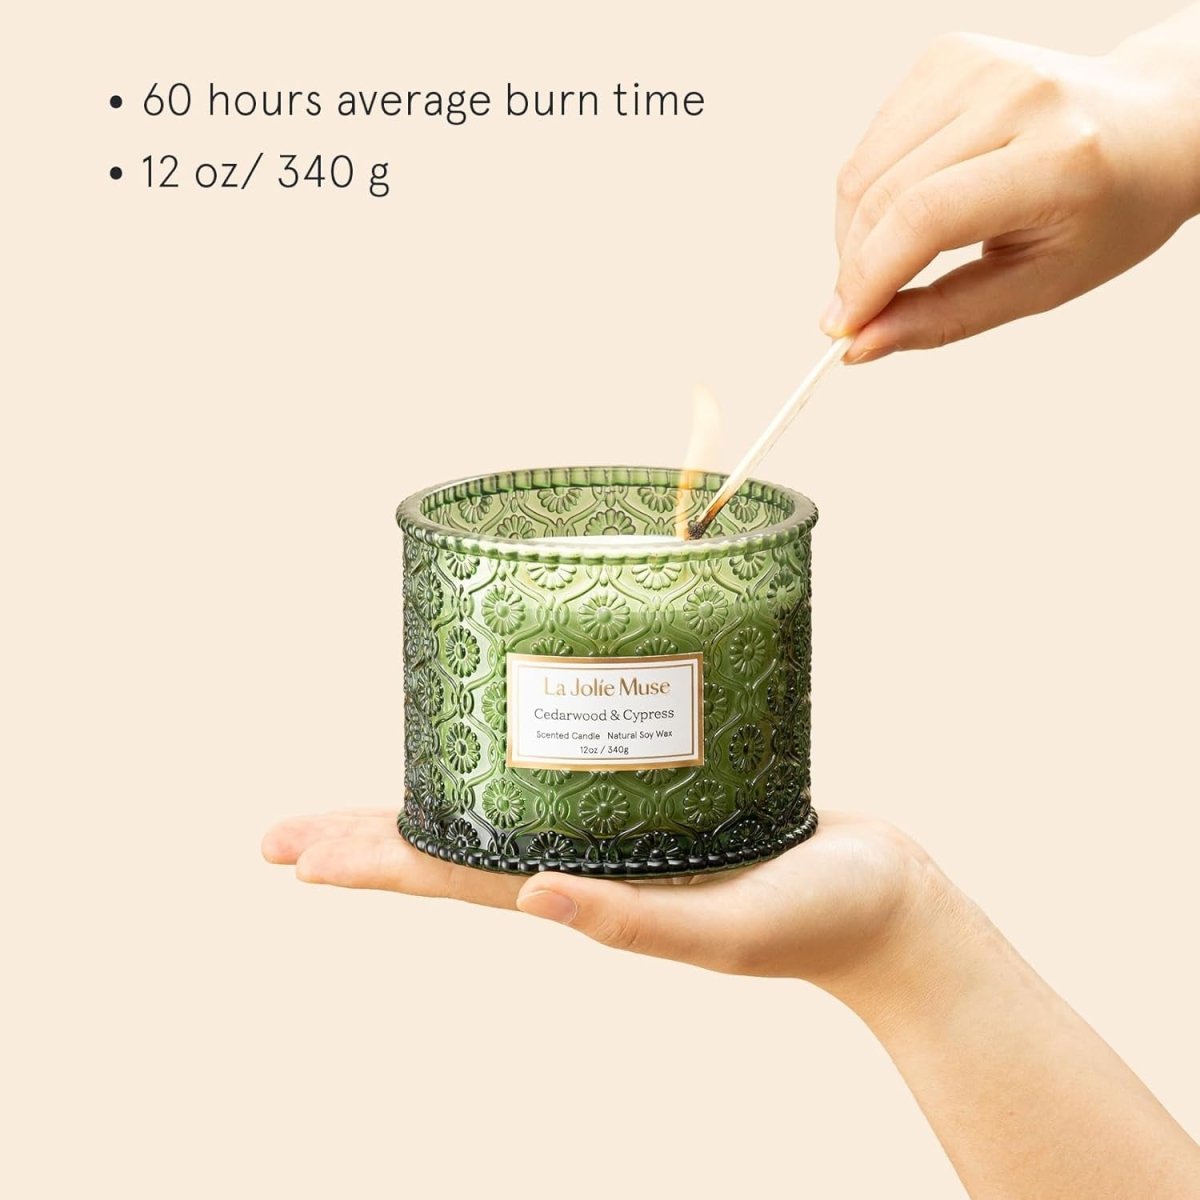 Christmas Candles, Cedarwood & Cypress Candle, Large 2-Wick Soy Candle for Home Scented, Holiday Candle Gift, Long Burning Time, Luxury Gift for Women & Men, 12 Oz - Shiny Nails